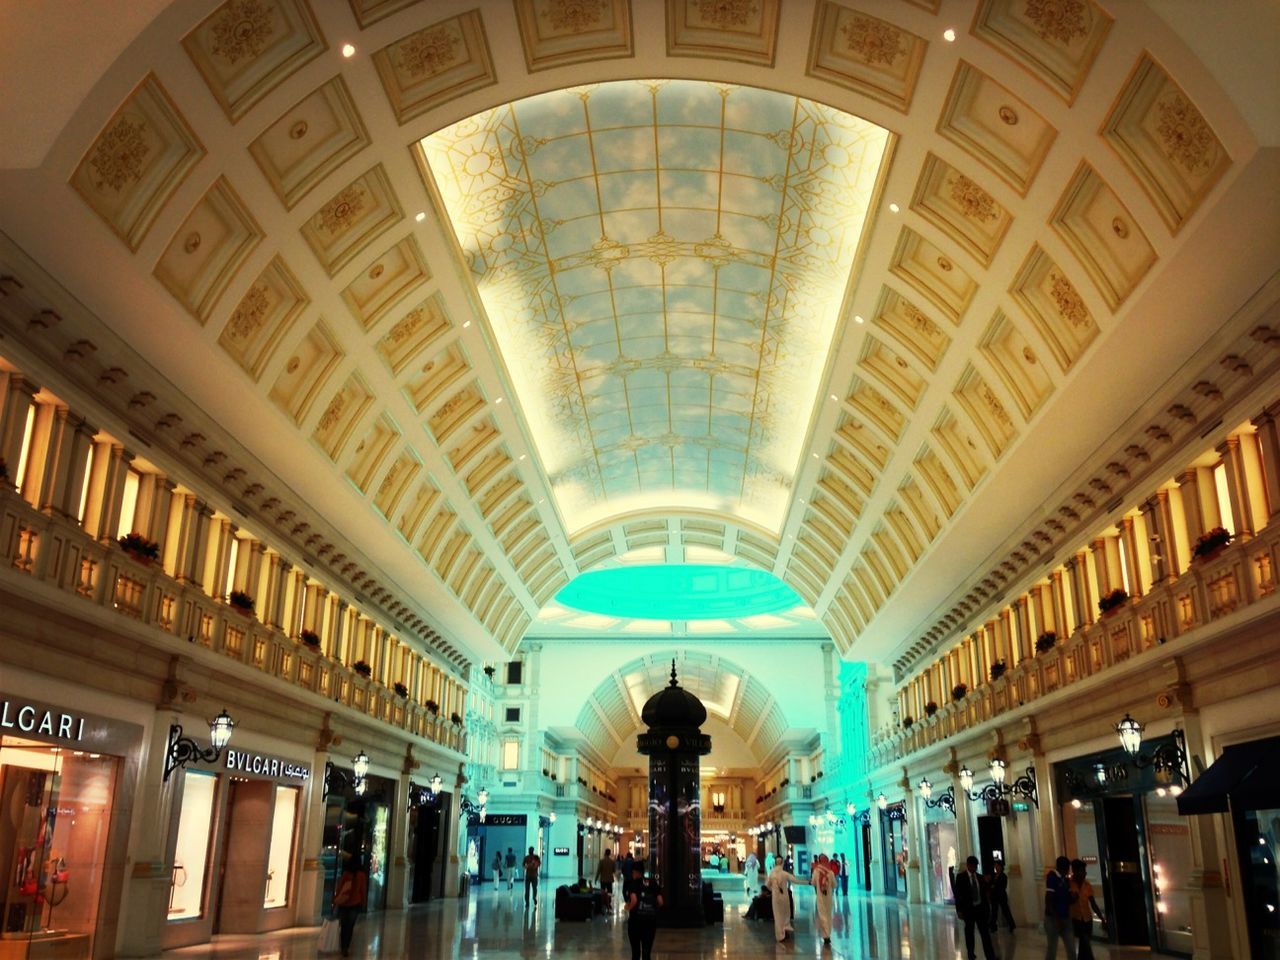 indoors, ceiling, architecture, built structure, lifestyles, large group of people, men, person, illuminated, leisure activity, arch, lighting equipment, low angle view, interior, tourist, shopping mall, travel, architectural column, tourism